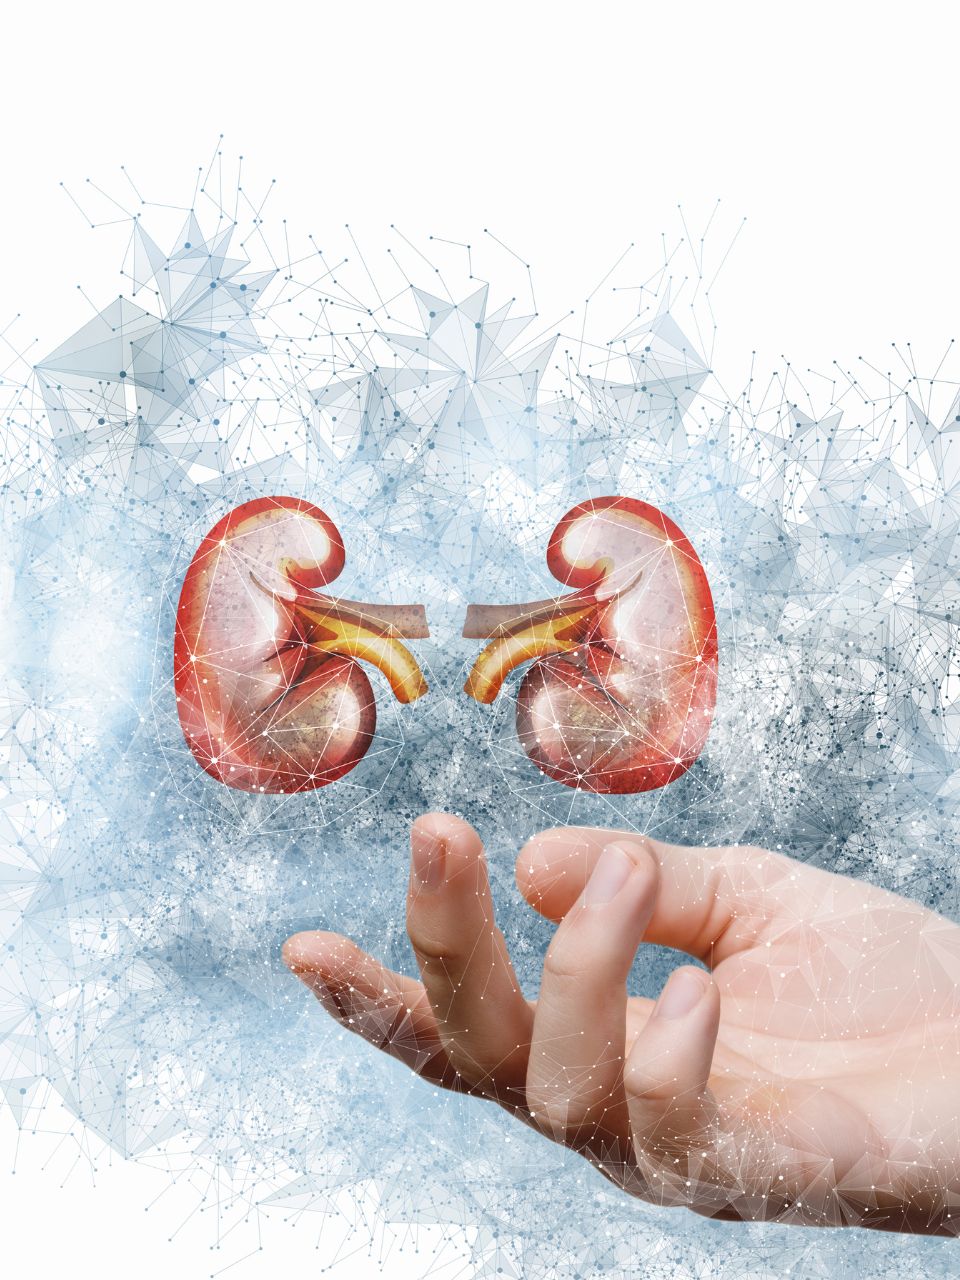 Why you should pay attention to the health of your kidneys